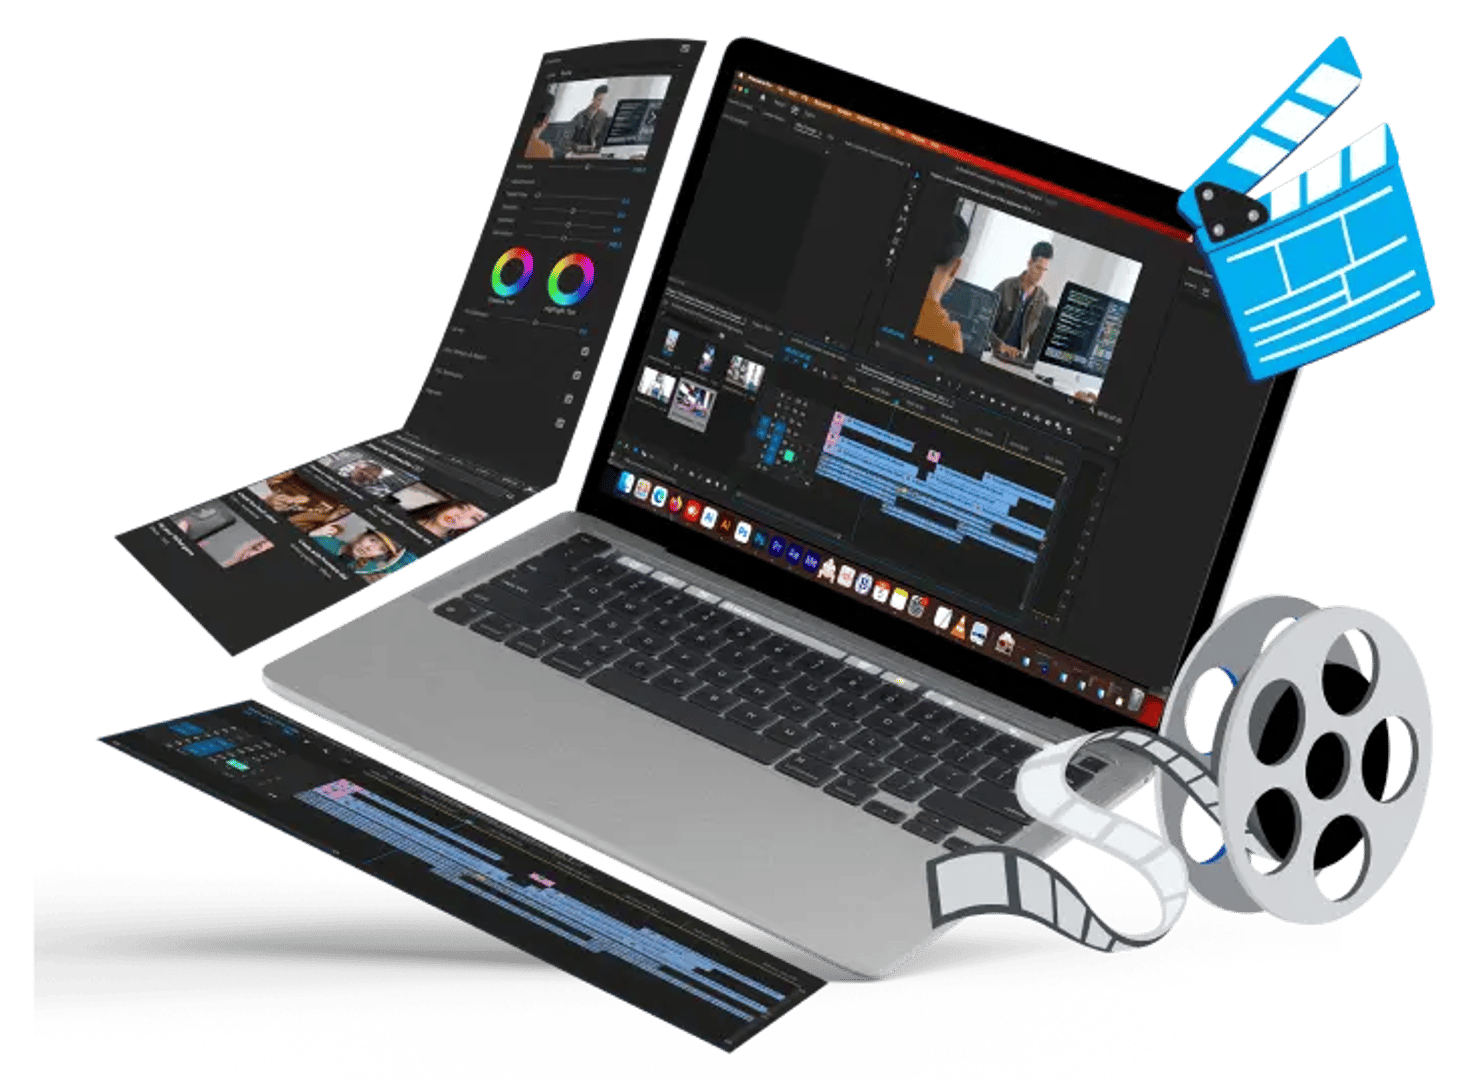 Two laptops display video editing software on their screens, with video reels popping out from the screens